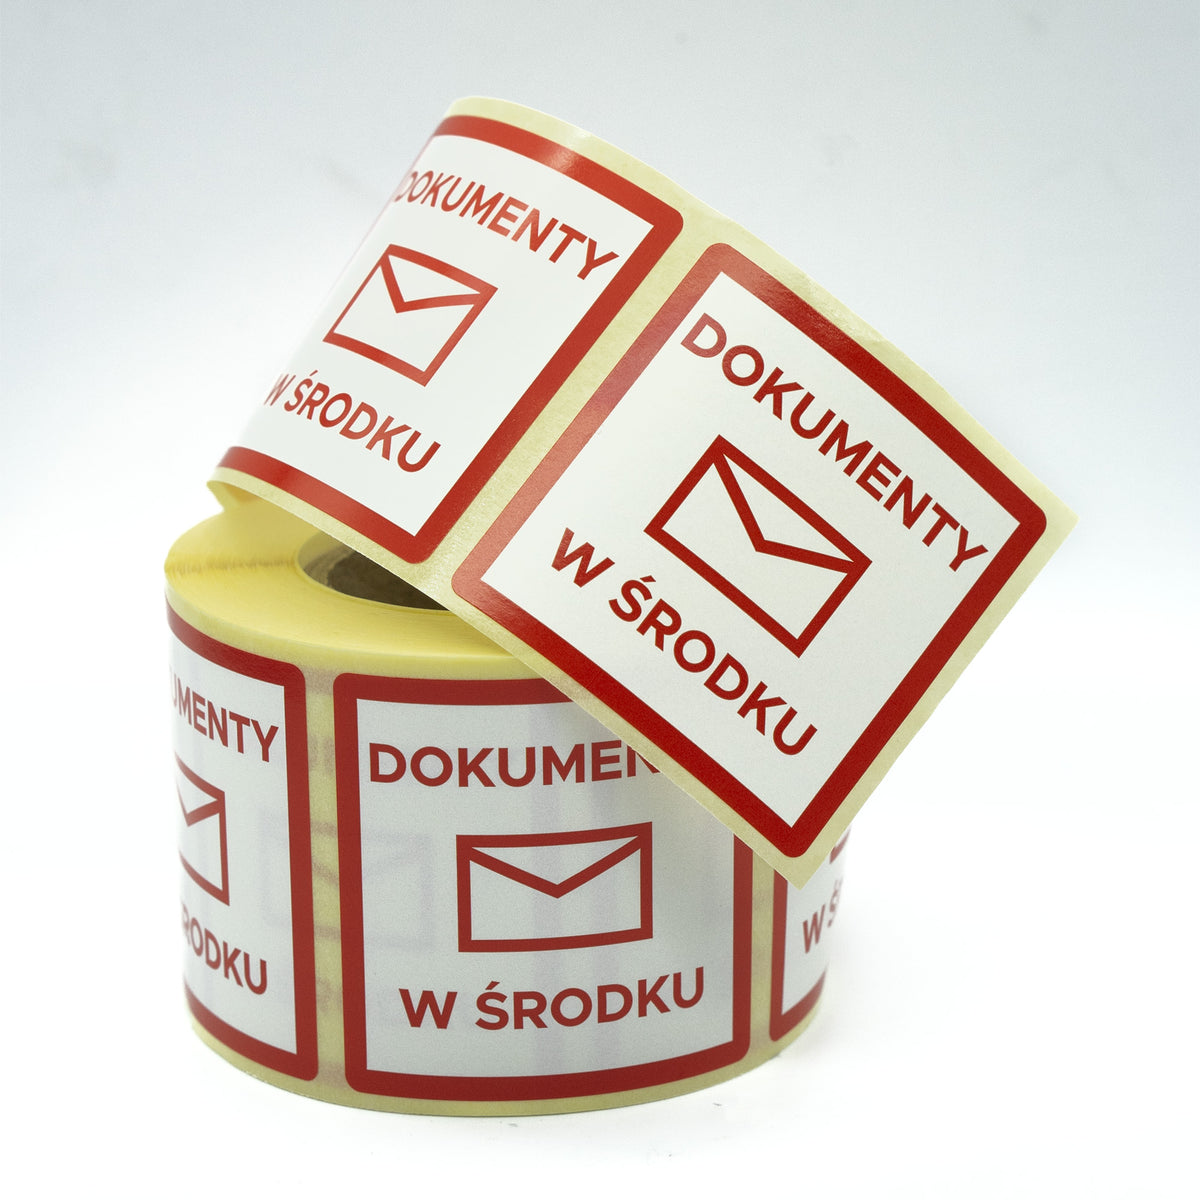 Self-adhesive warning labels - caution documents 50x50mm 500 per roll